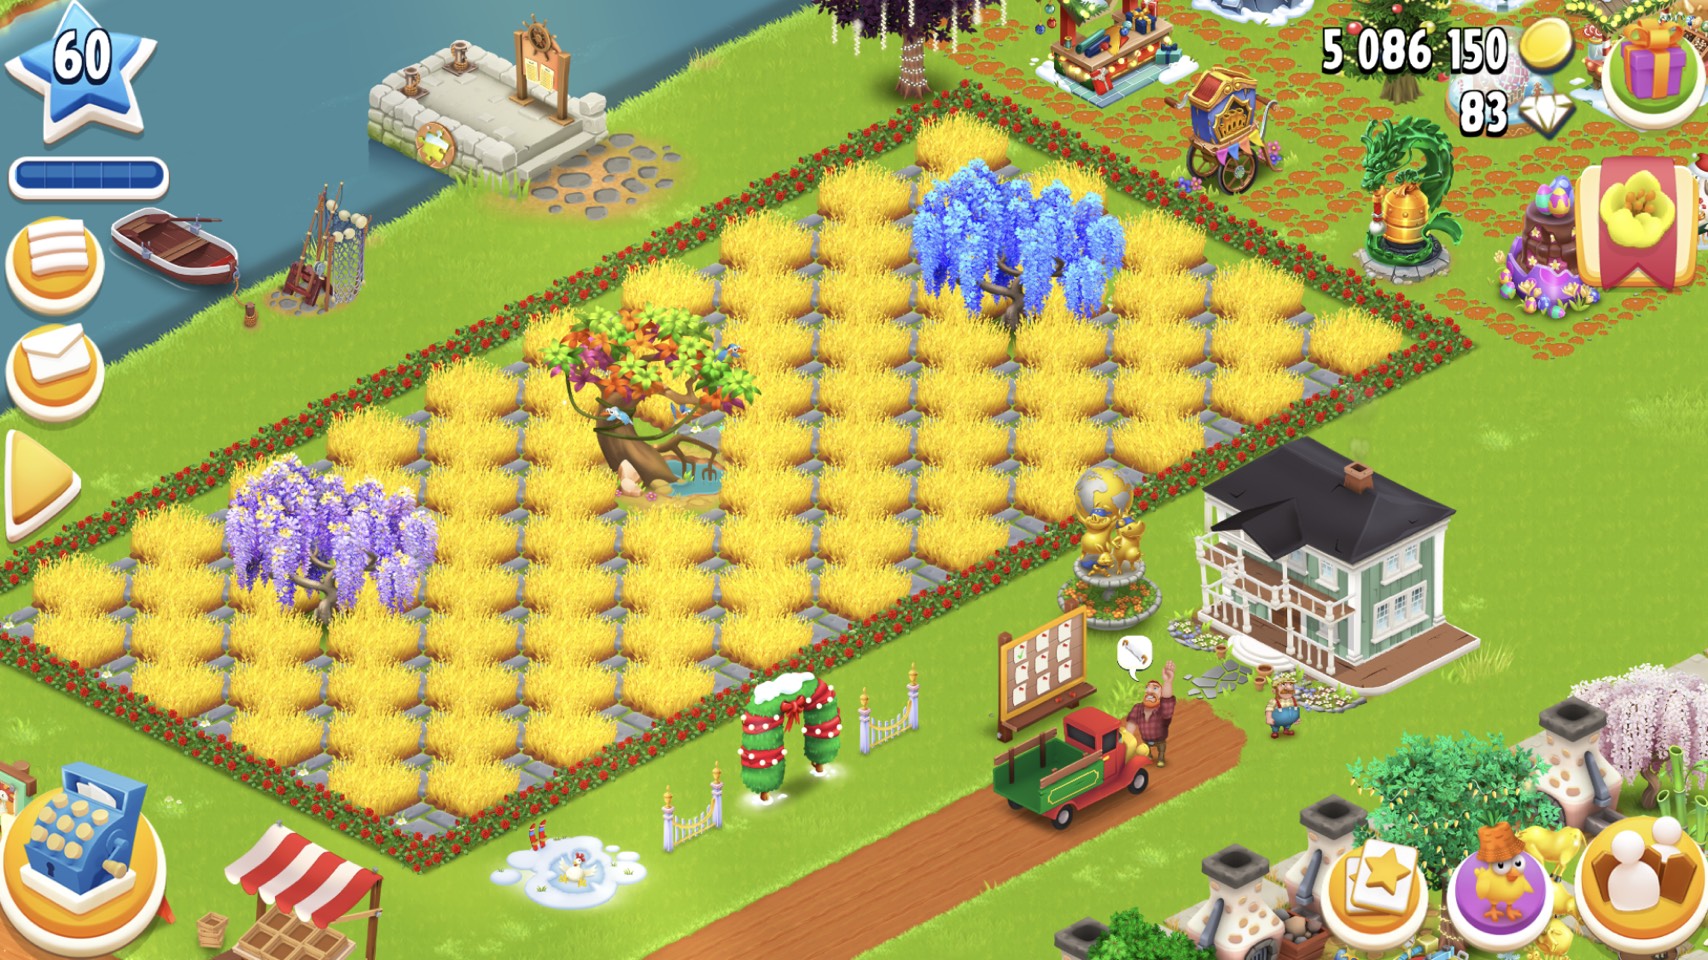 Level 60 barn 3350+silo 1400. Available 5m coins+600 vouchers+9 ticket. Lvl town 7. Has magic trees. Beautifull and good price. 